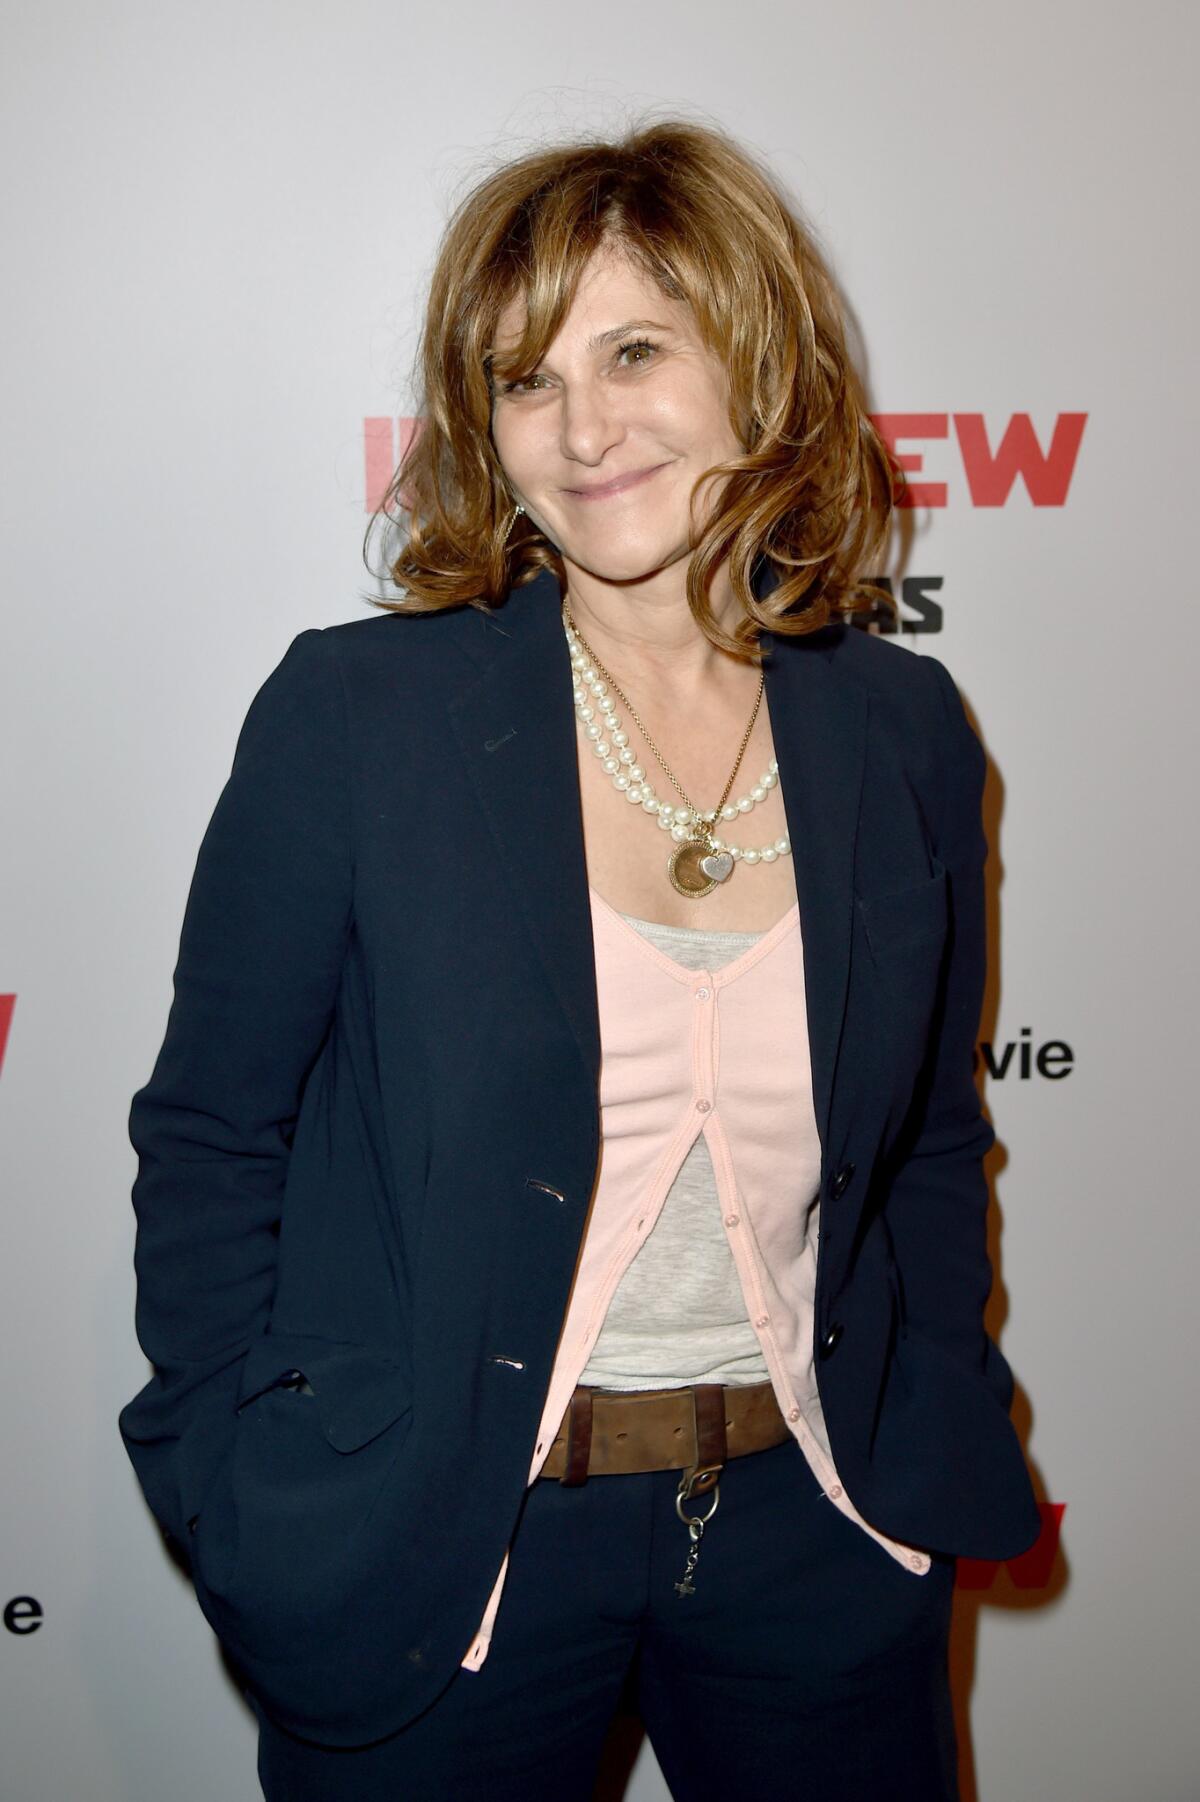 Sony Pictures Entertainment co-Chairman Amy Pascal attends the premiere of "The Interview" in Los Angeles on Dec. 11. Sony announced Wednesday it was pulling the plug on the Dec. 25 release of the film due to threats from hackers.